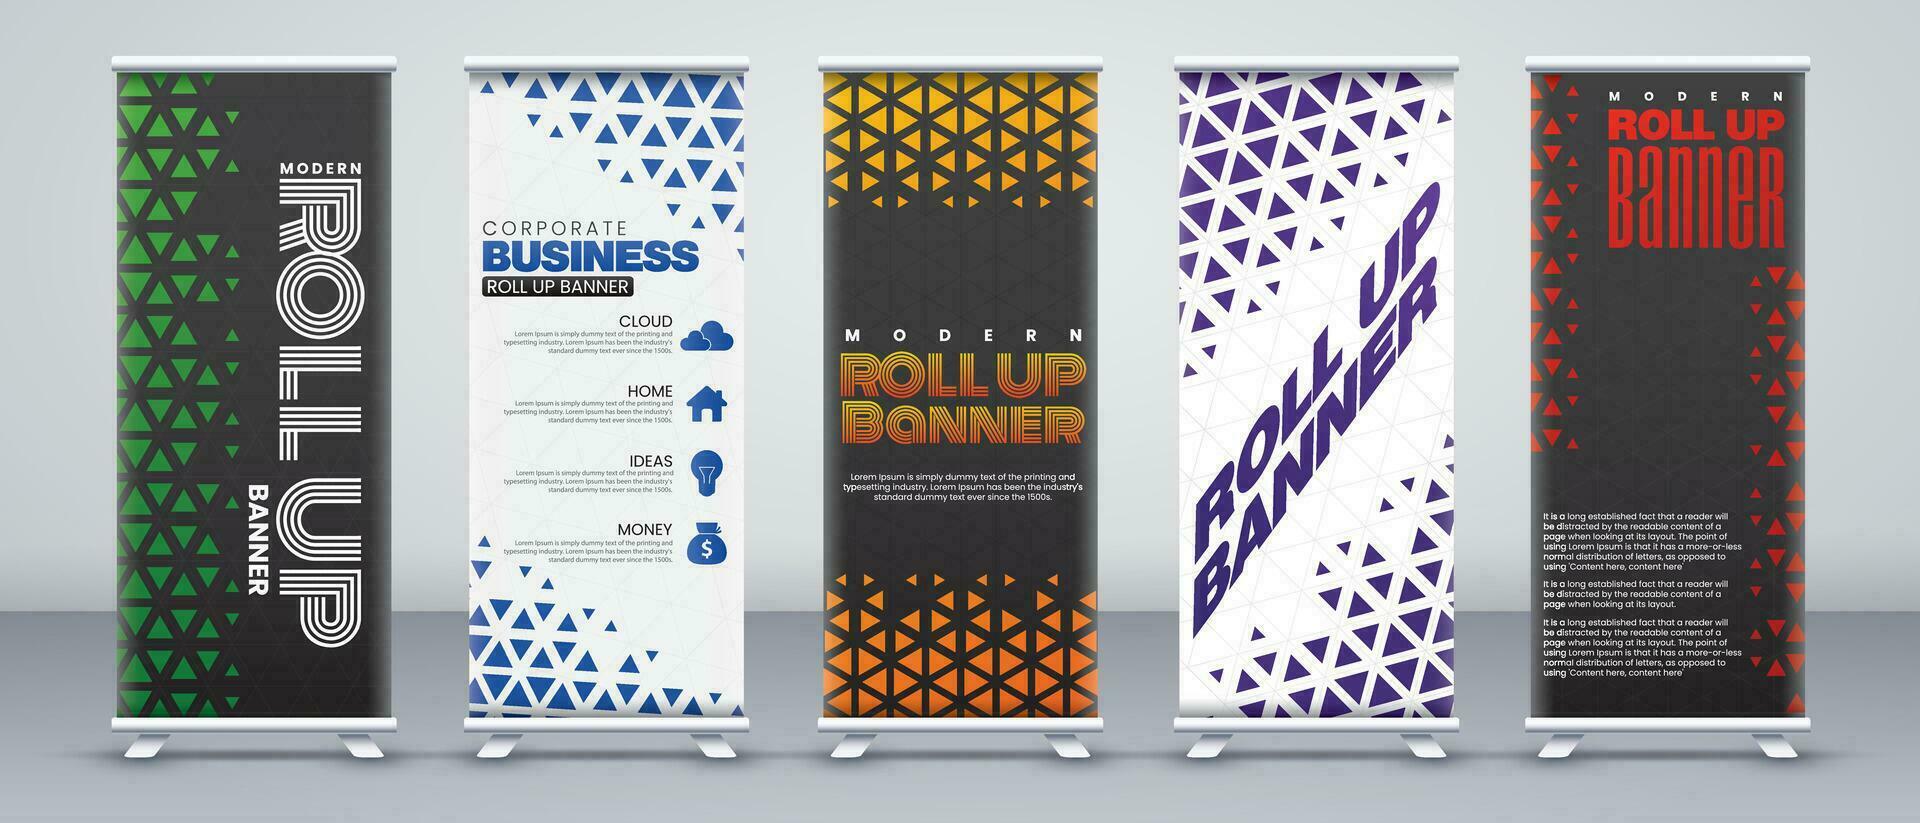 Modern luxury roll up banner design for business events, meetings, presentations, marketing events in green, blue, orange, purple, red and black colors with print ready for x banner x stands vector